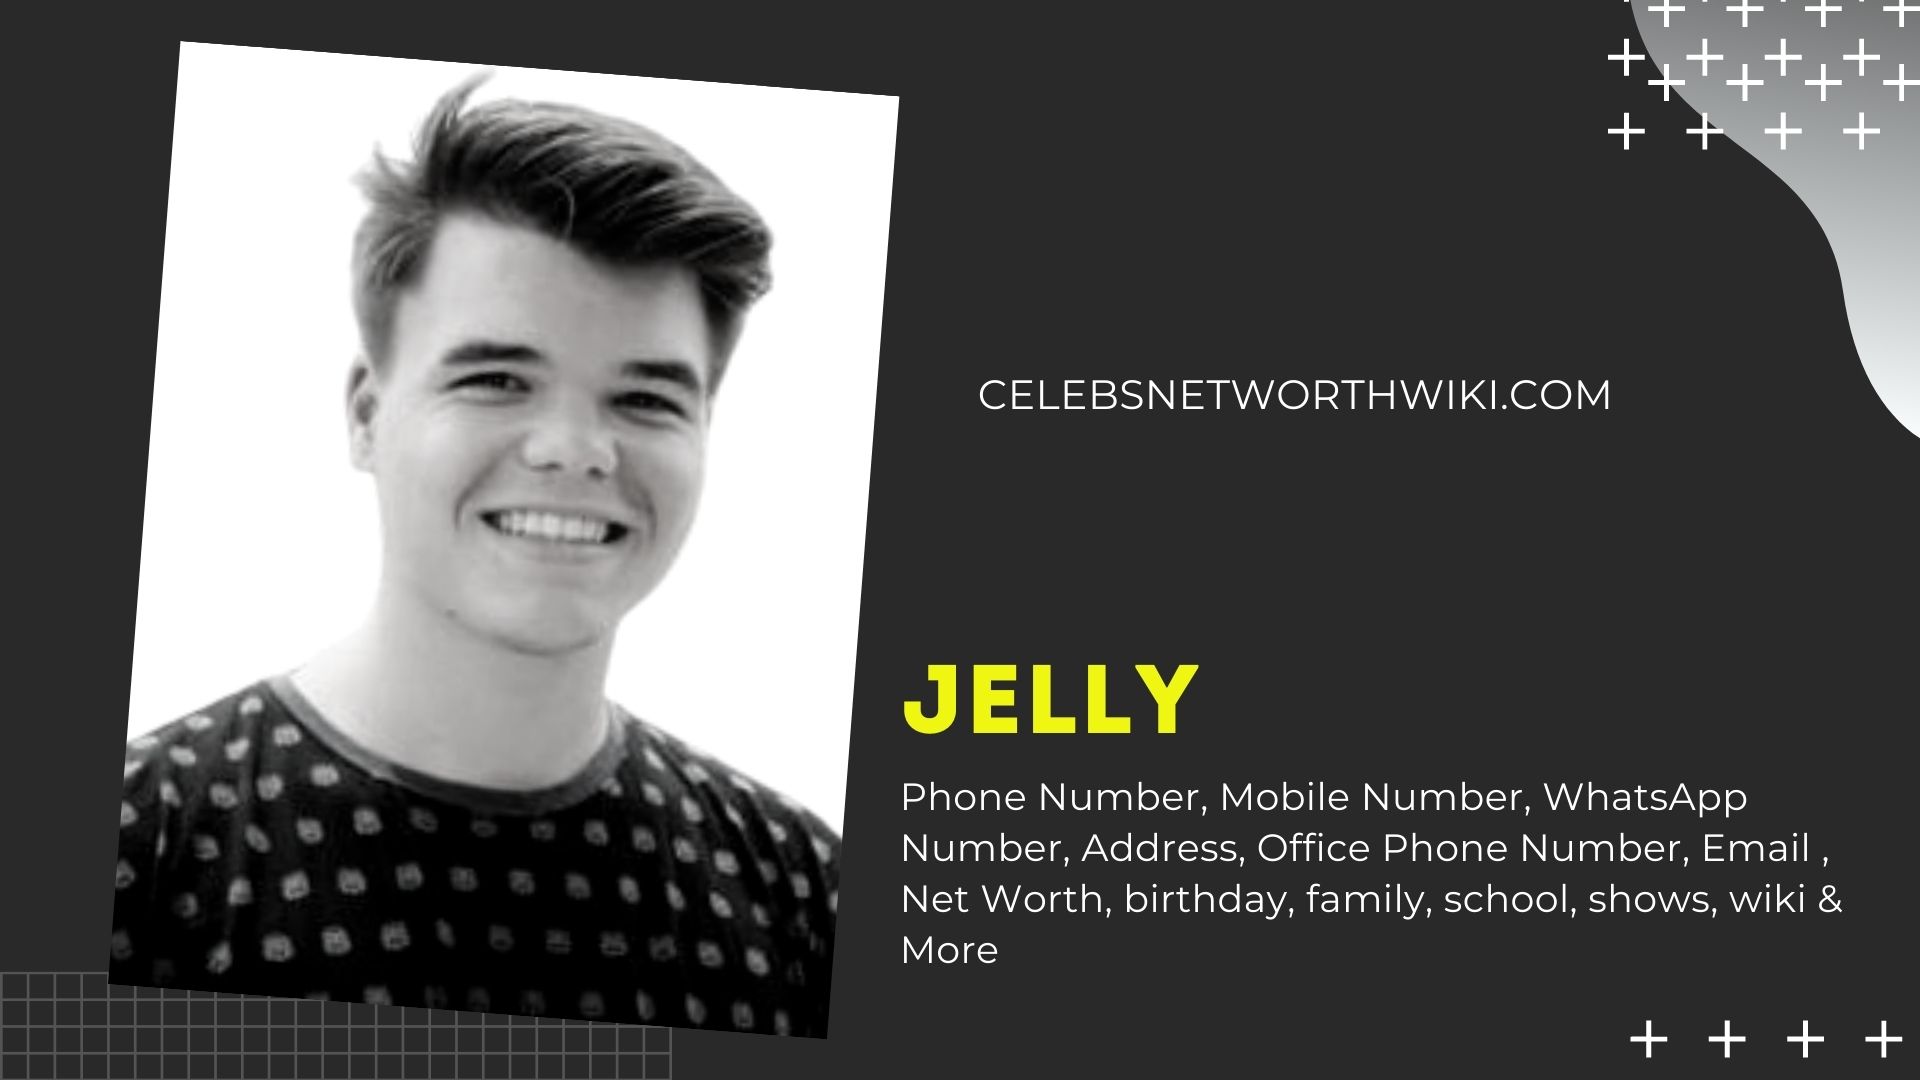 Jelly Phone Number Texting Number Contact Number Mobile Number